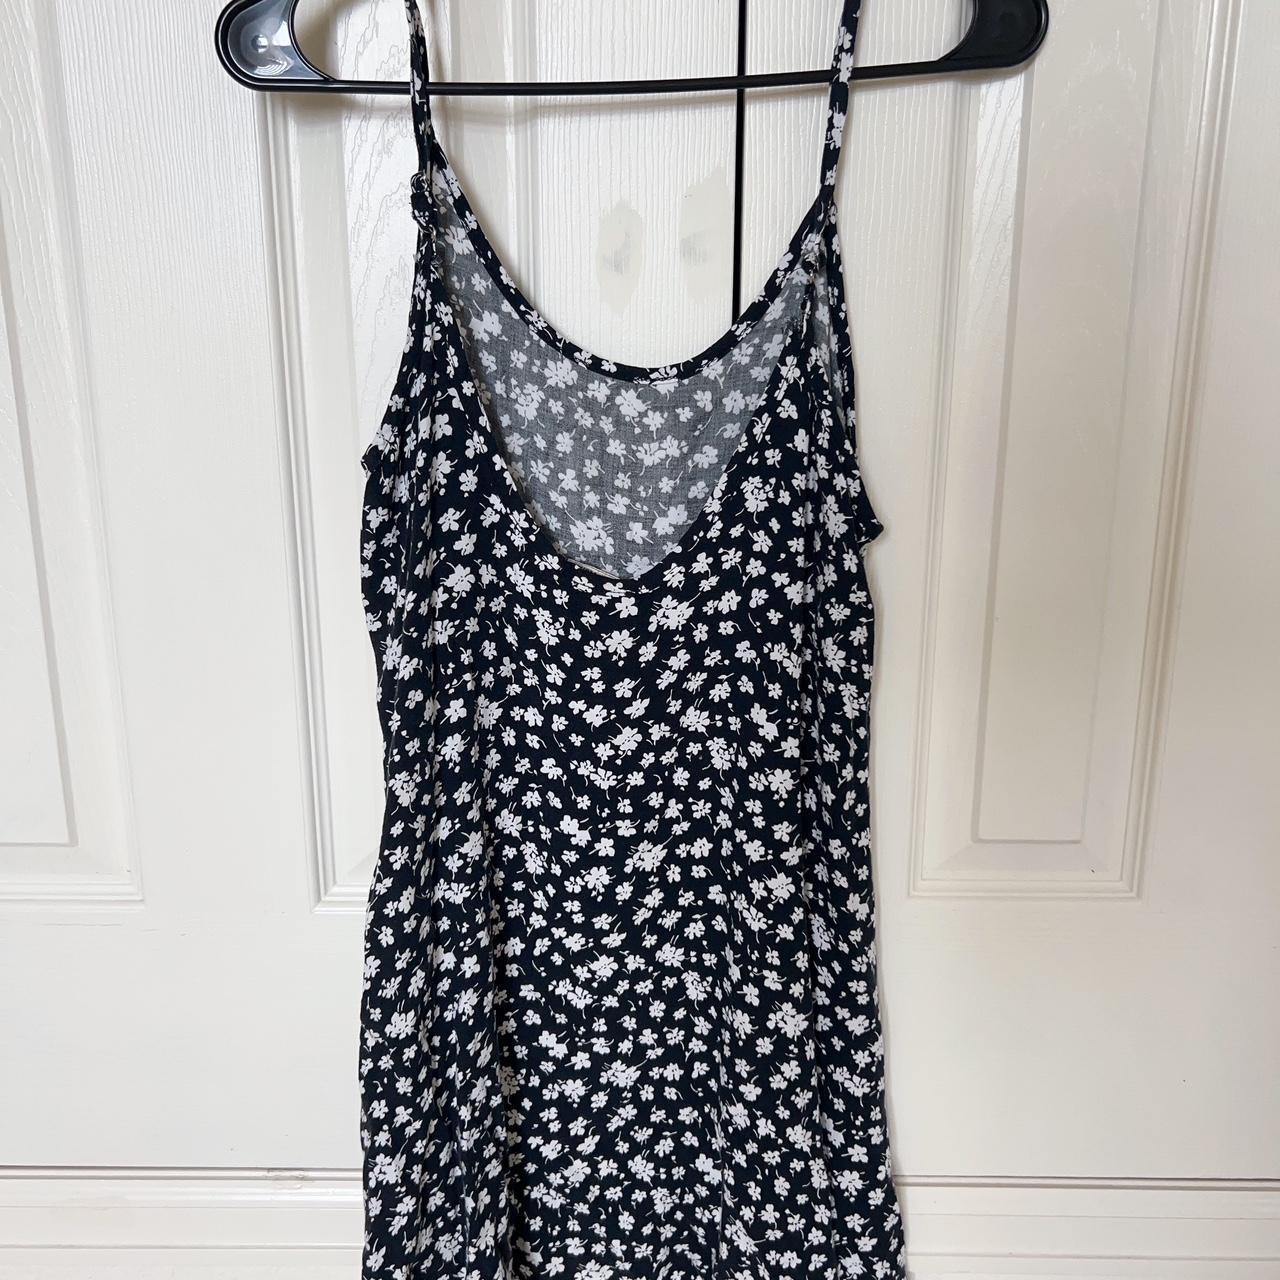 one size brandy melville dress. straps are